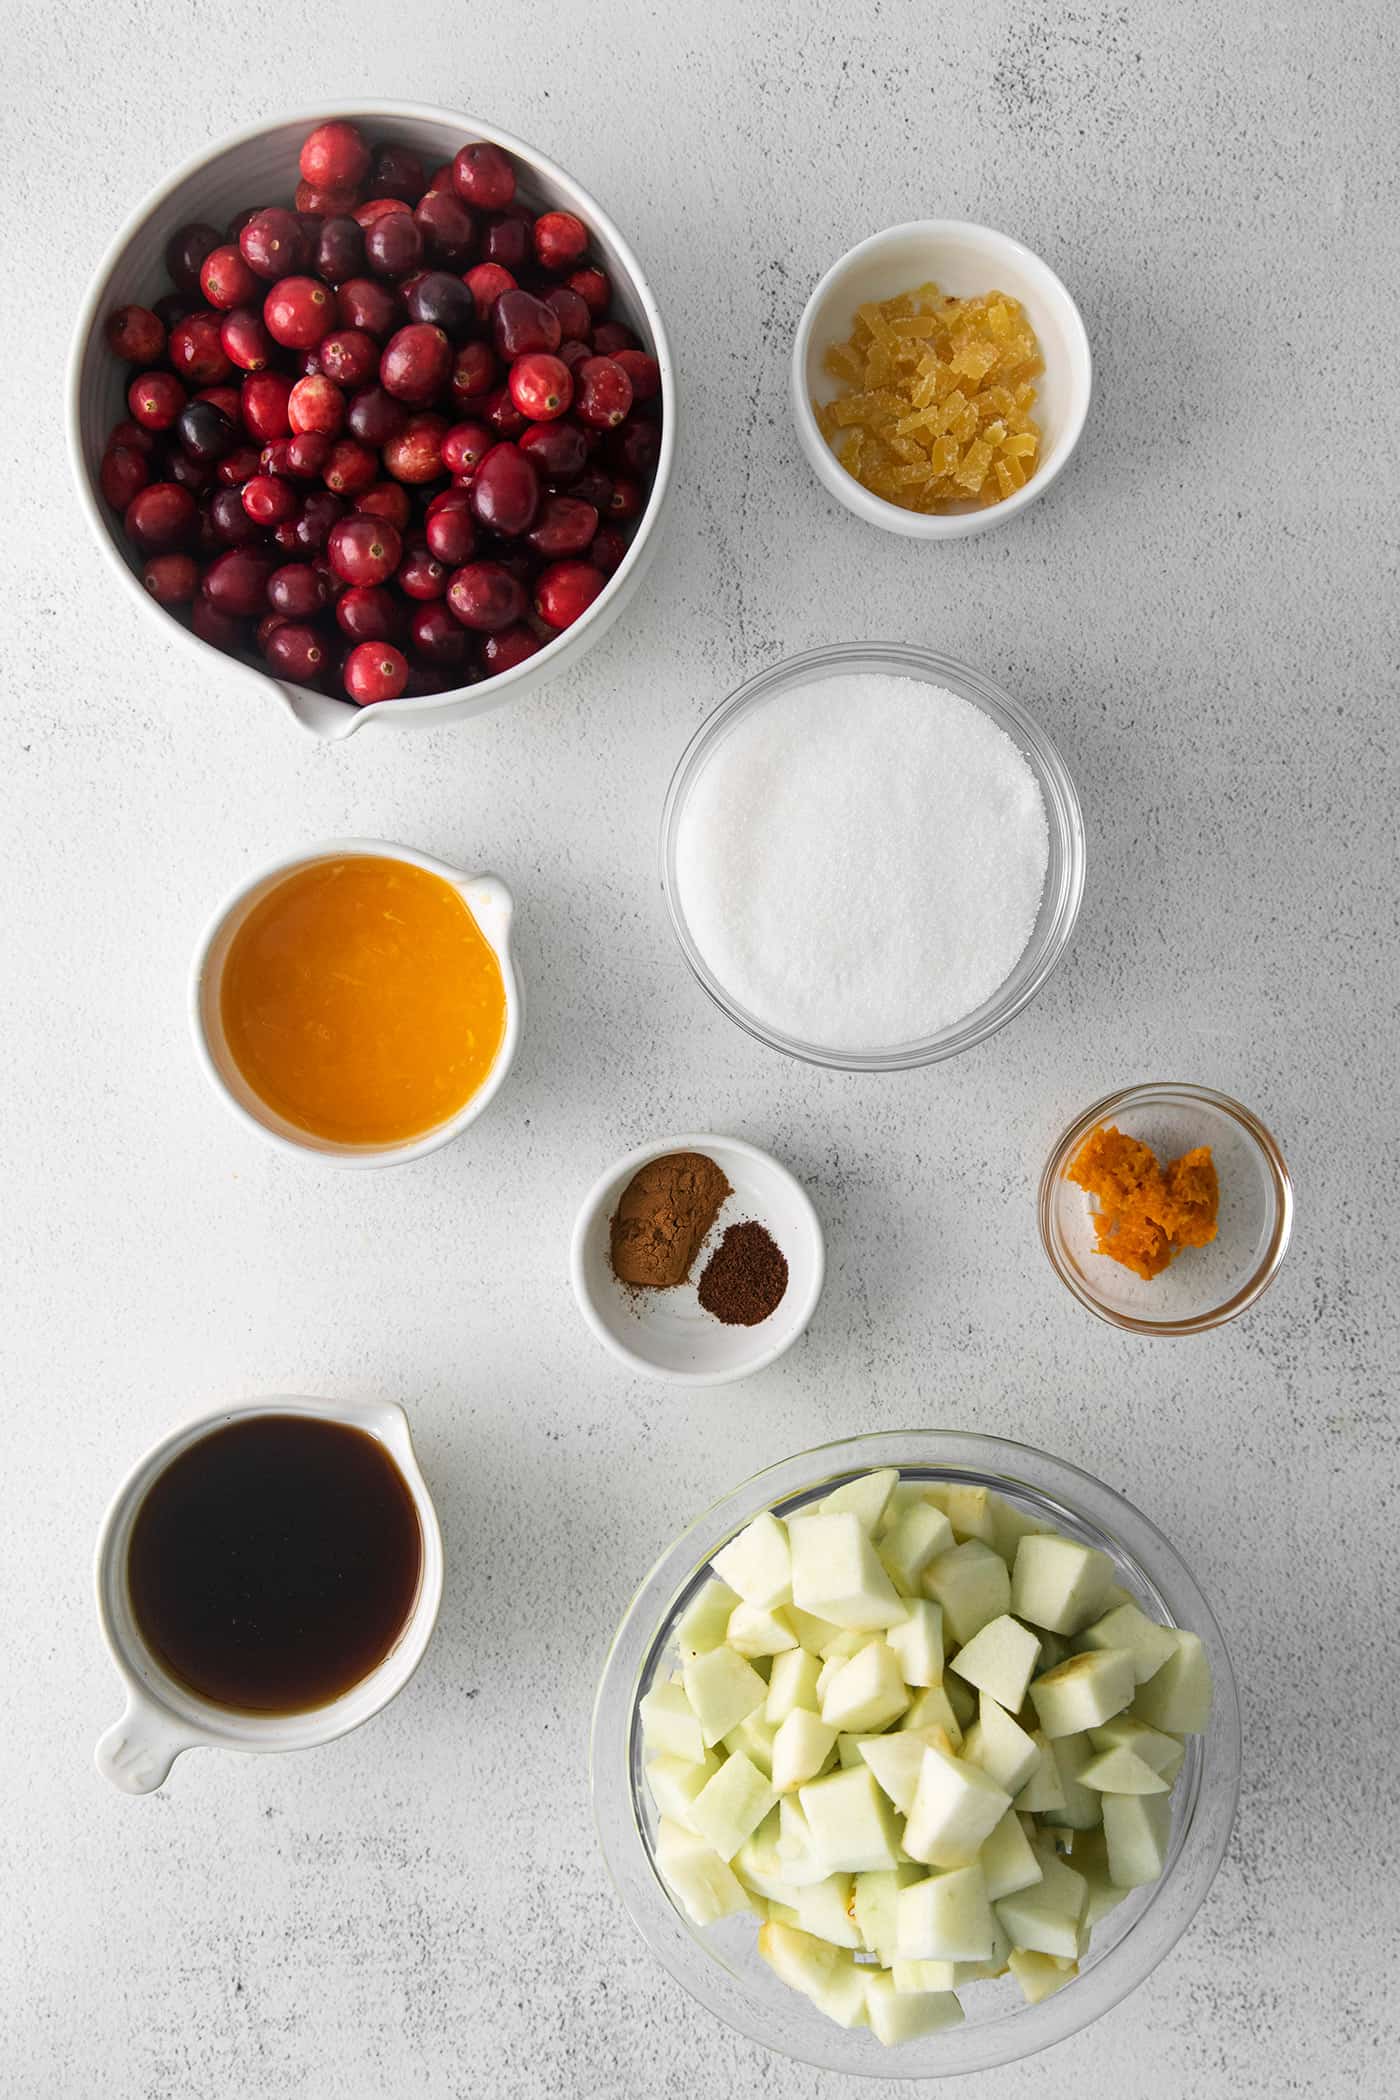 ingredients to make fresh cranberry sauce using apples and oranges